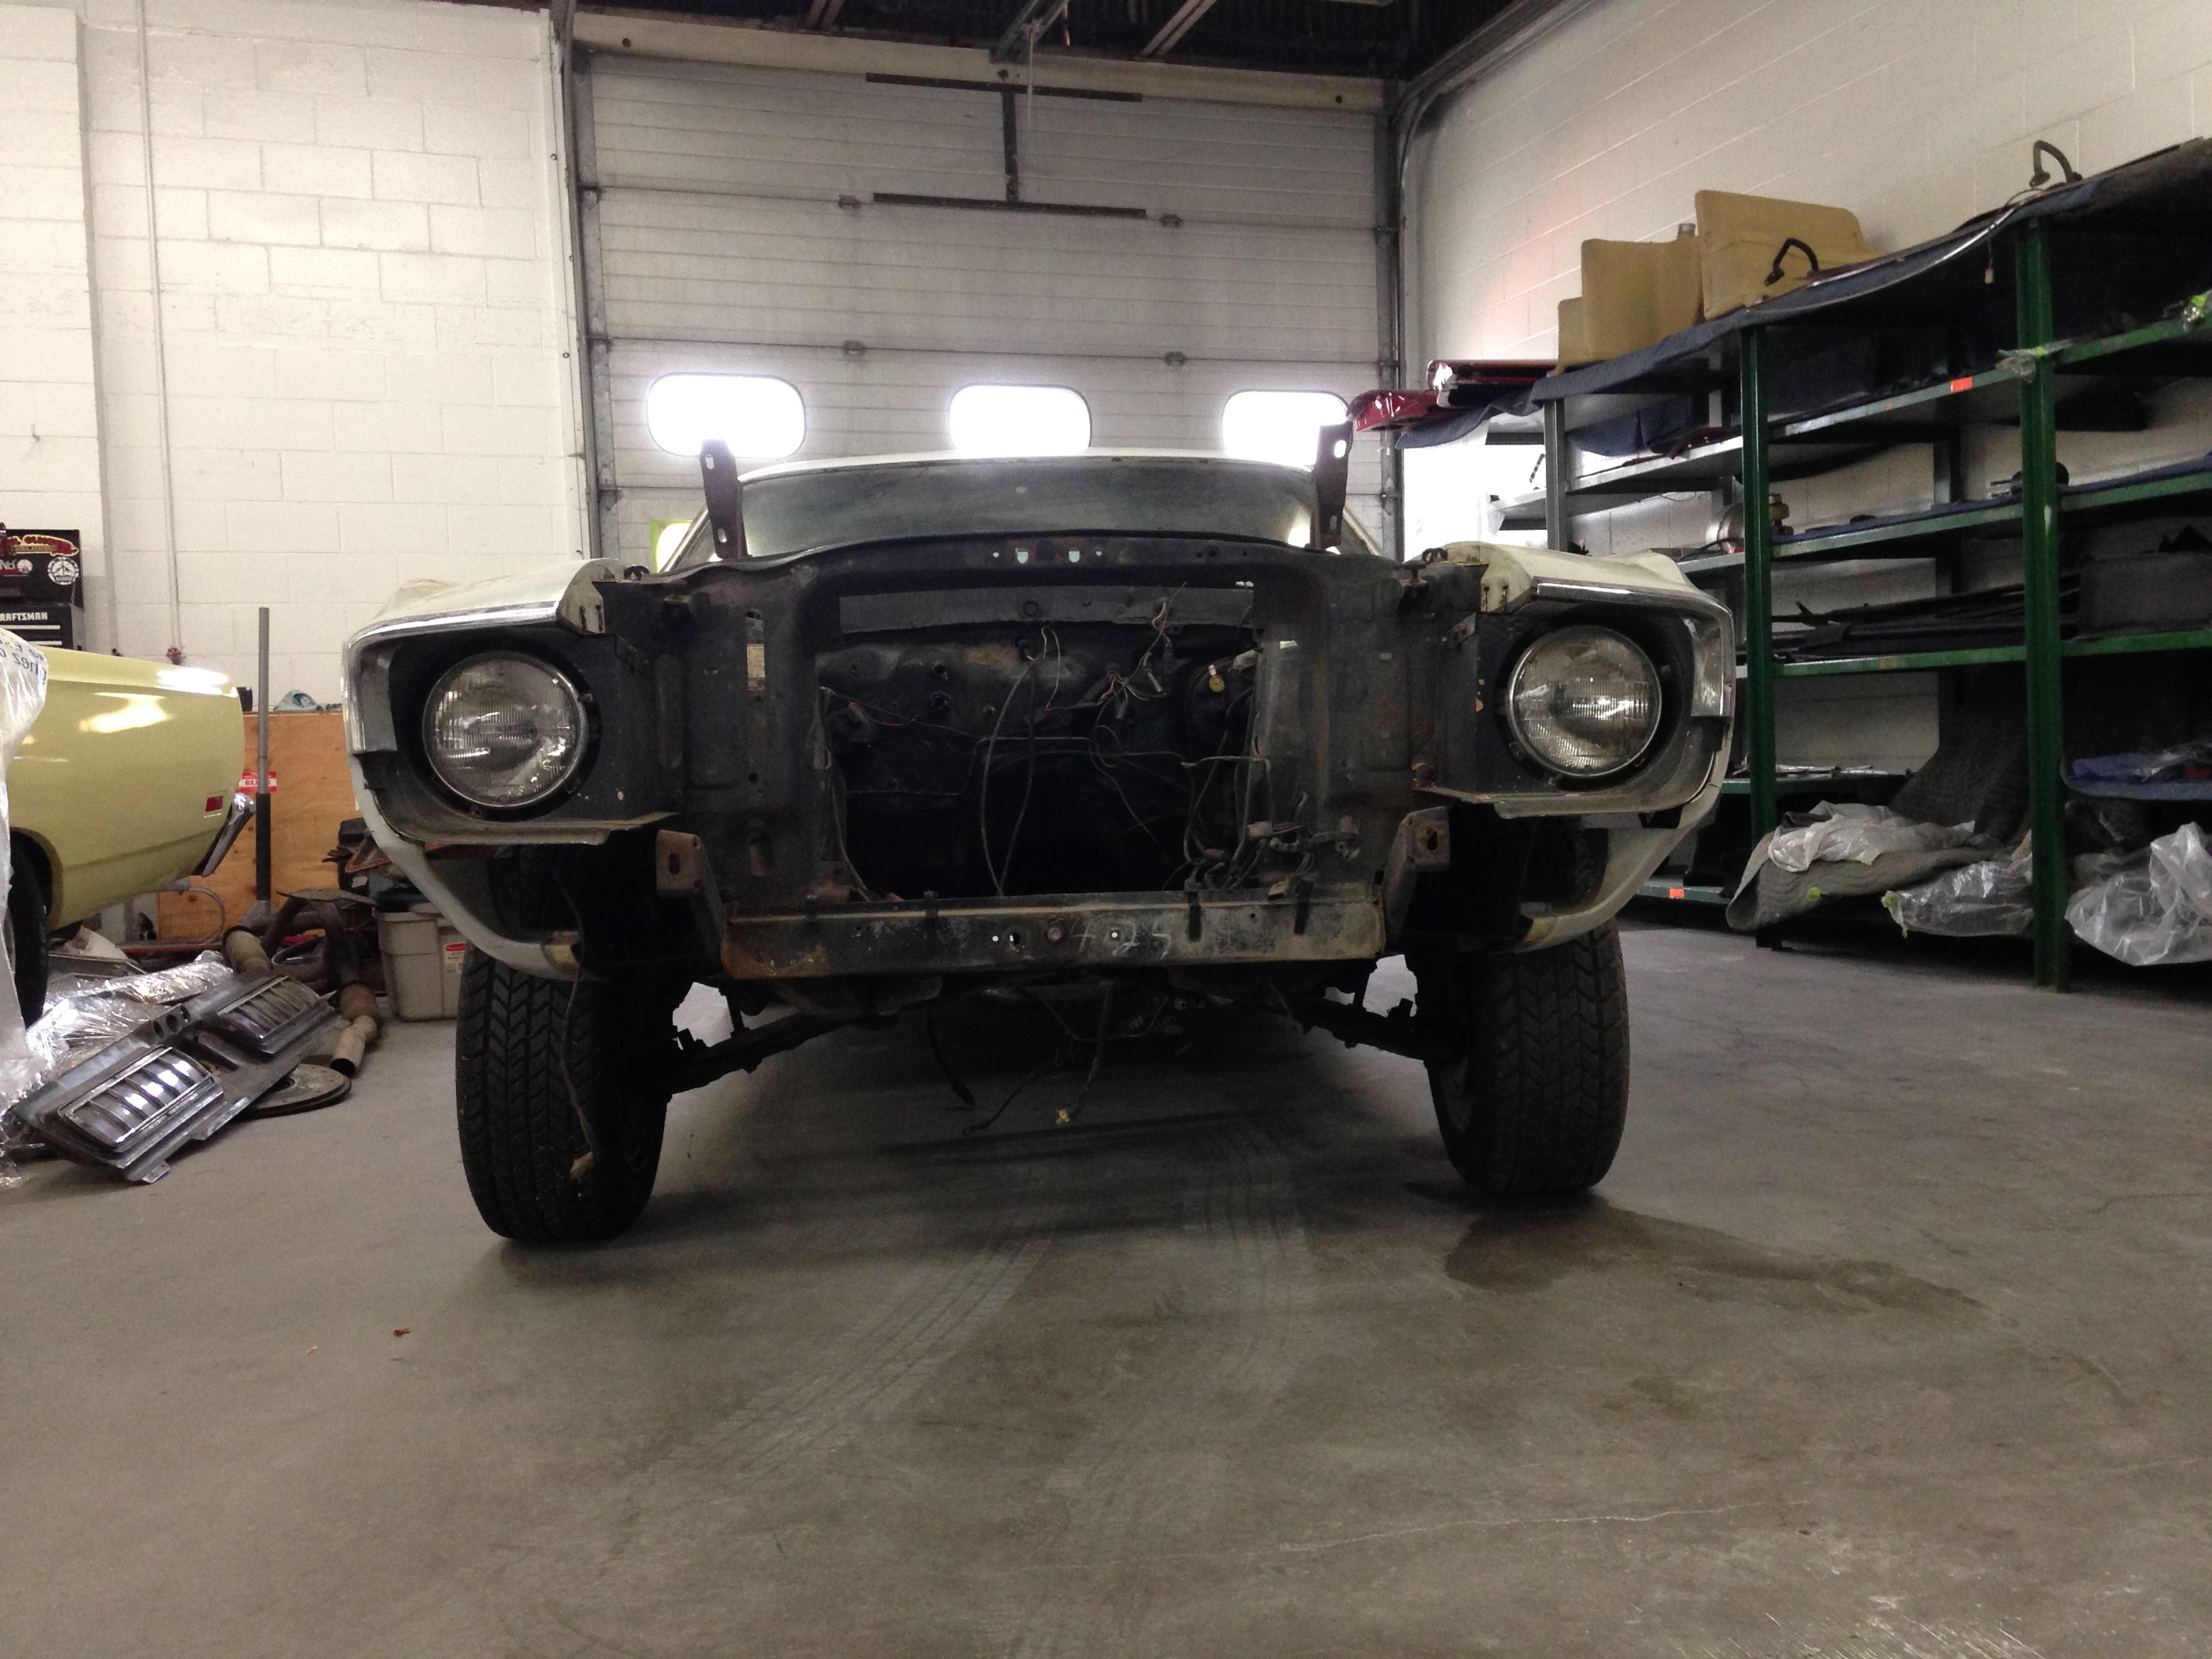 70 Mustang before picture